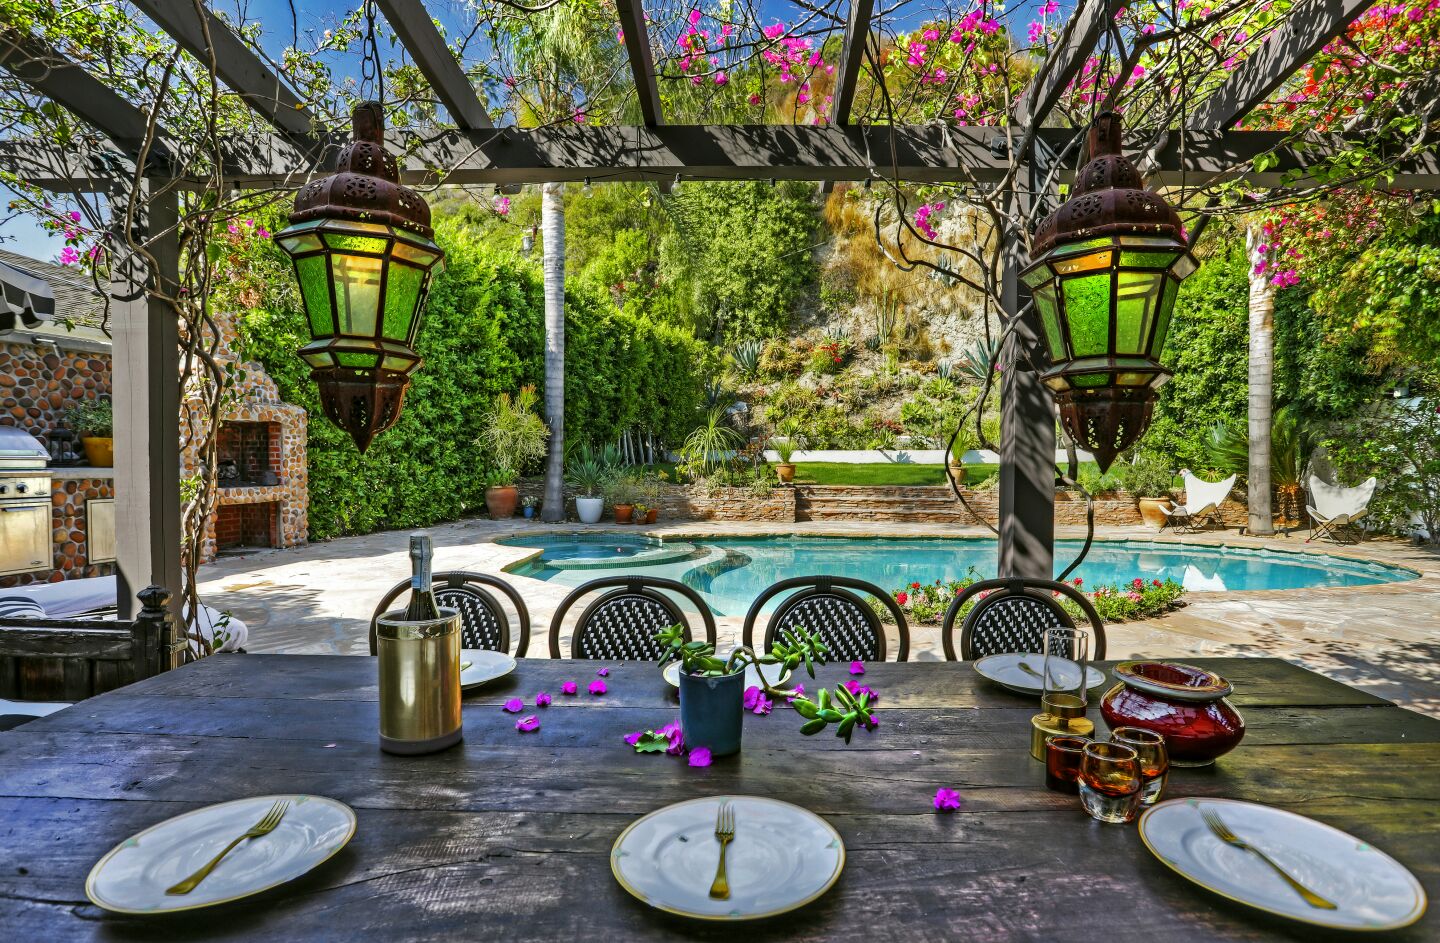 French doors open onto a dining patio in the backyard.